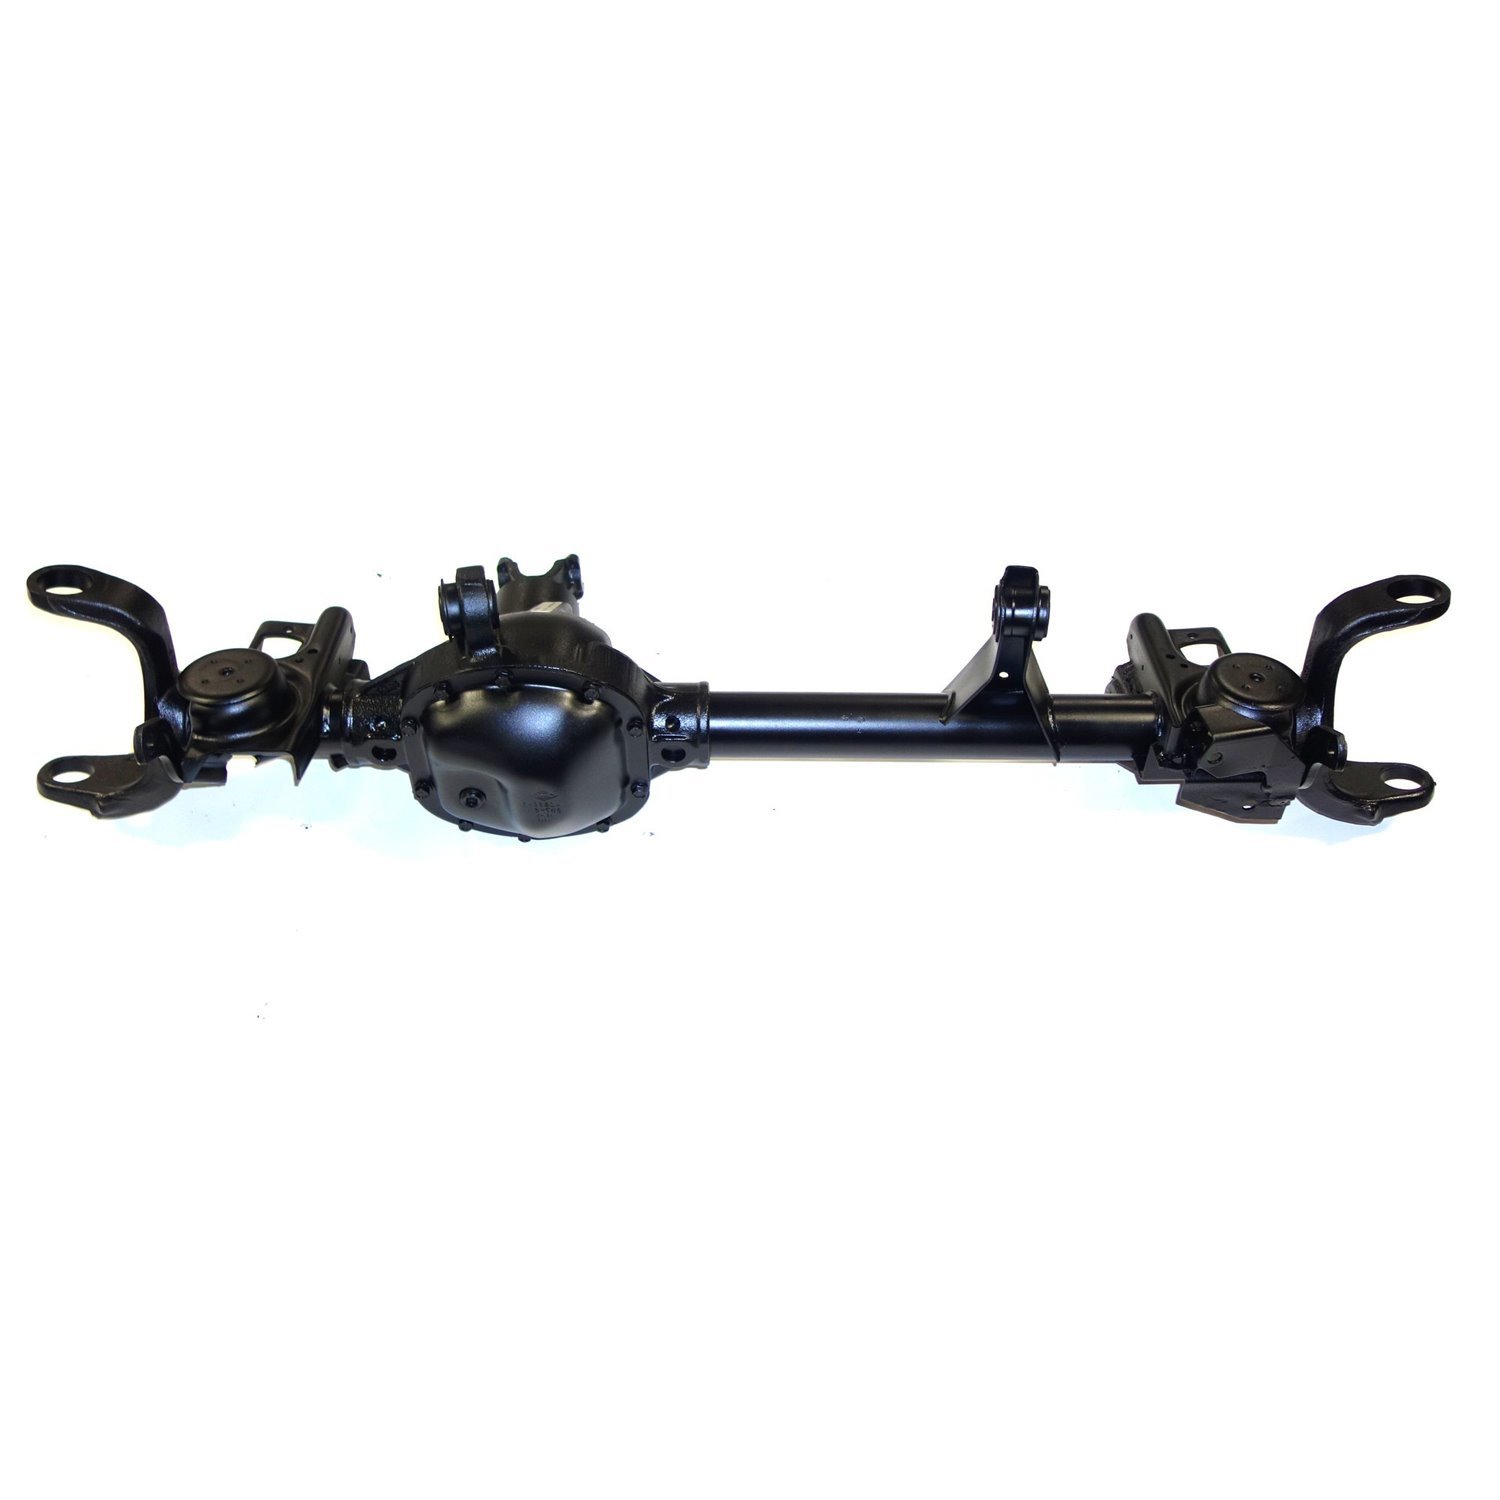 Remanufactured Complete Axle Assembly for Dana 30 09-10 Jeep Wrangler 3.21 Ratio with ABS